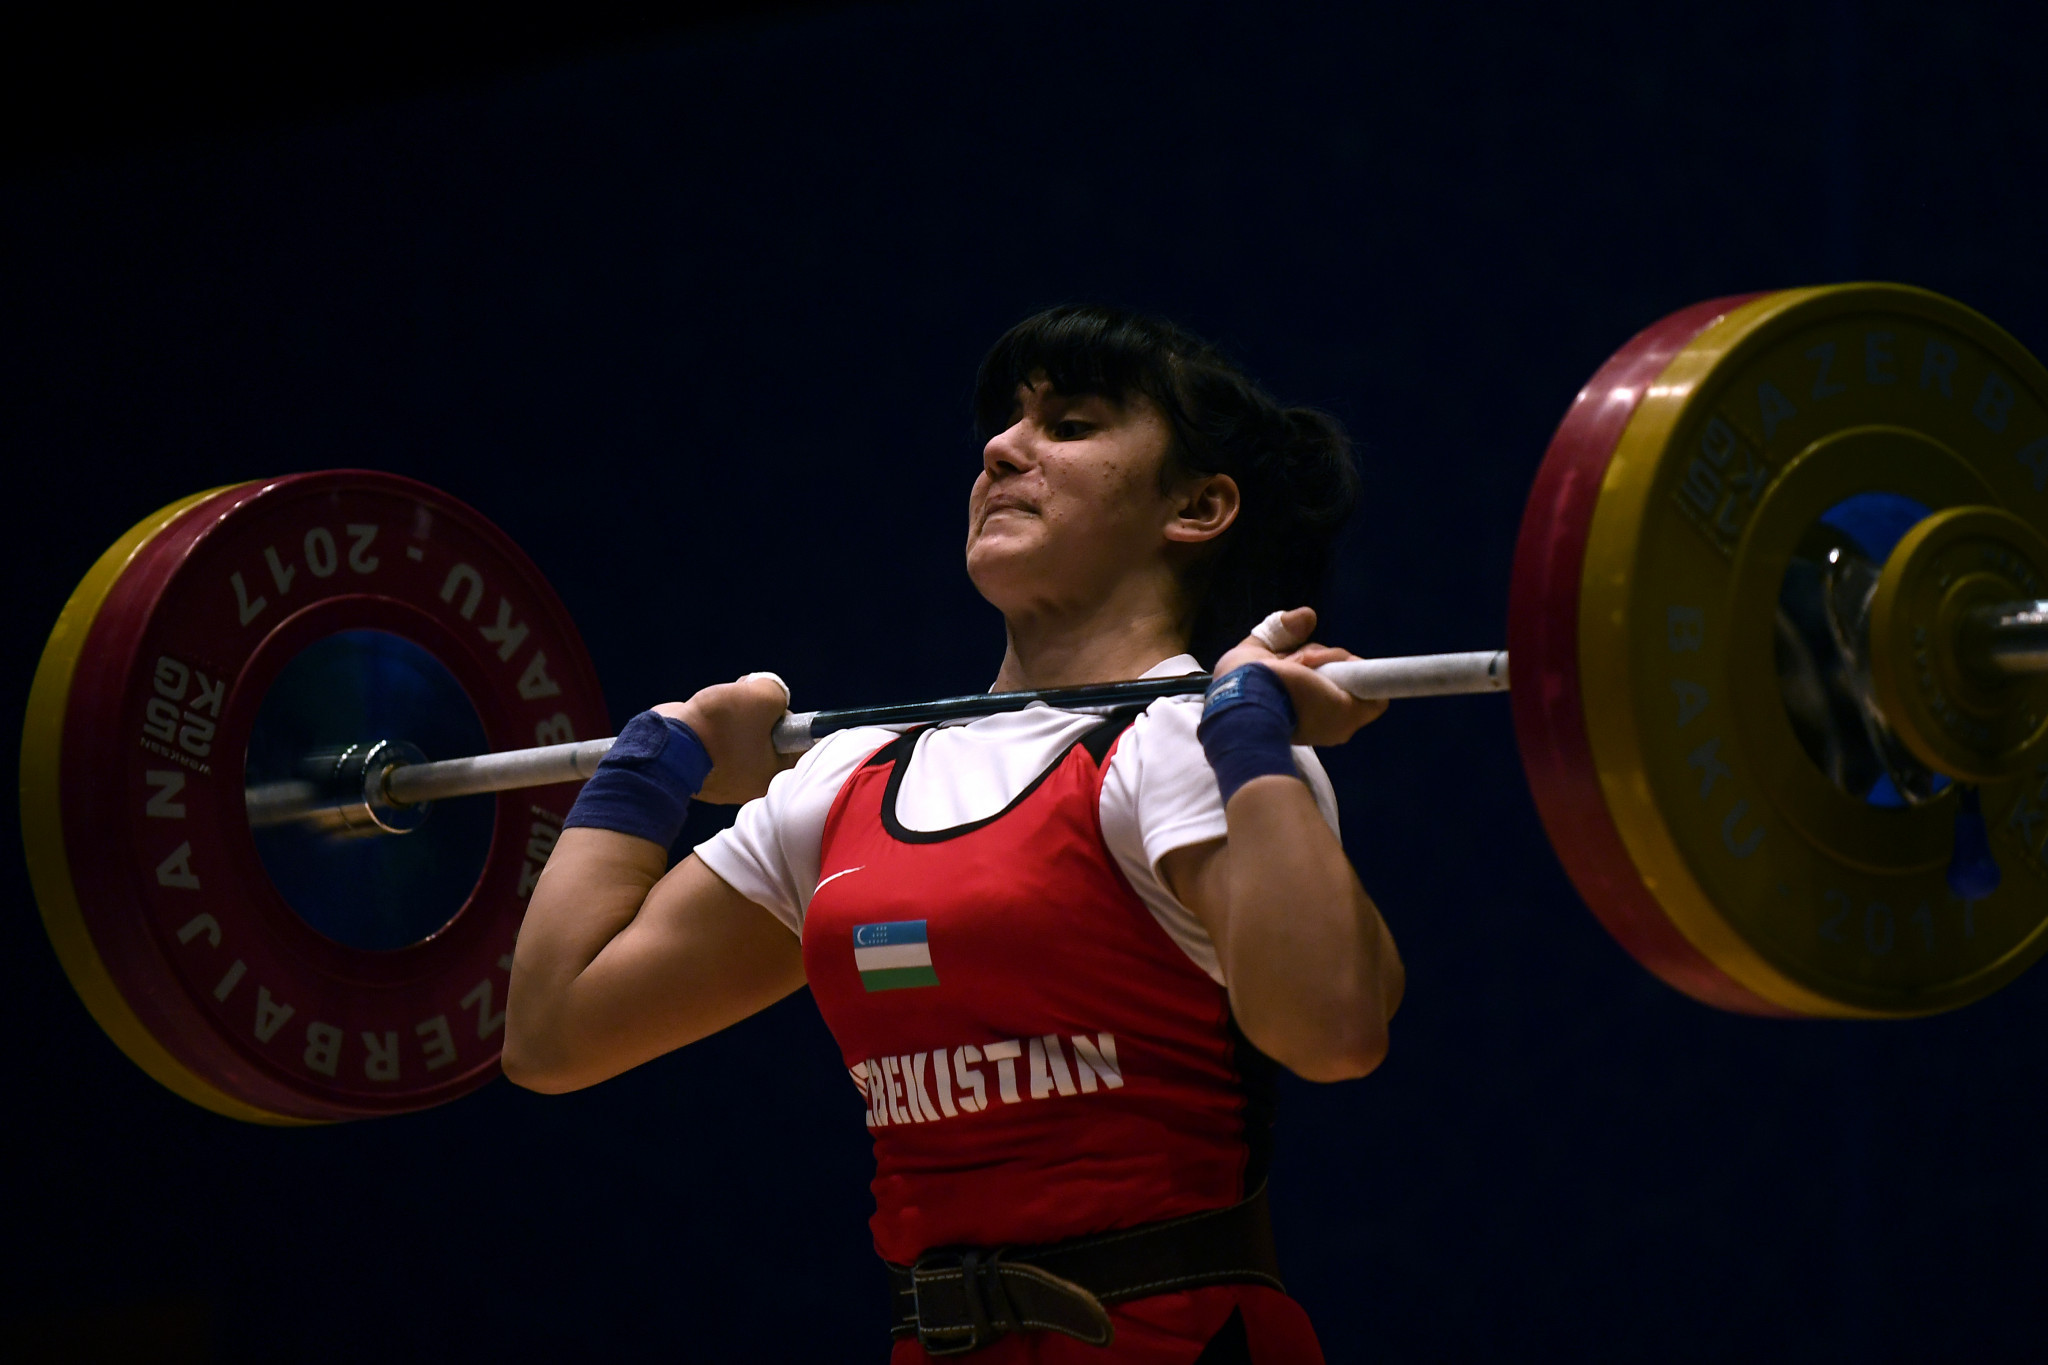 Triple gold for Uzbekistan and Mexico at IWF Youth World Championships